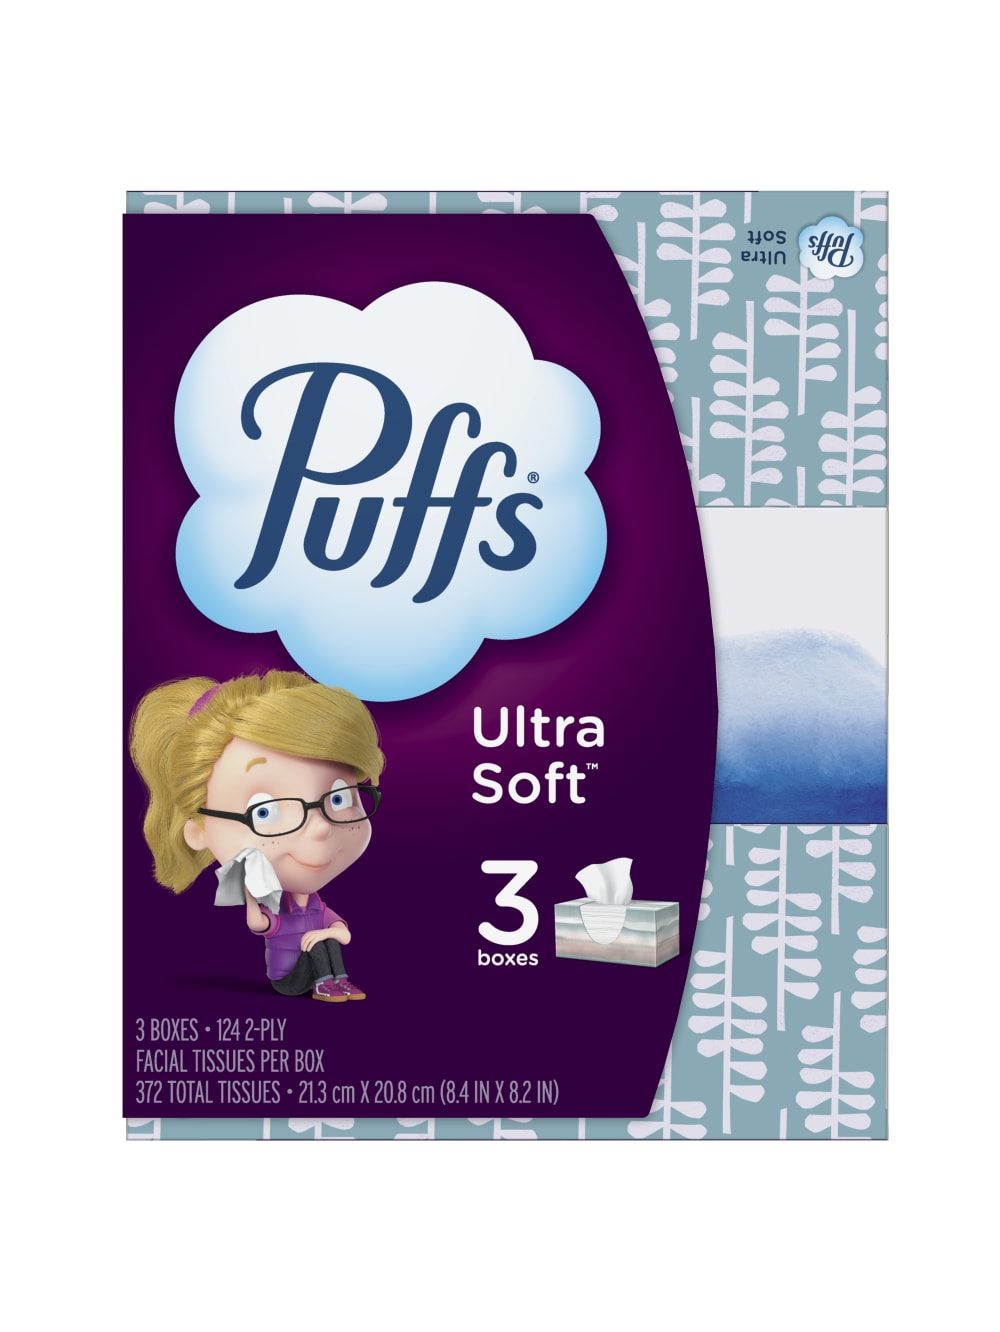 Puffs Ultra Soft Non-Lotion Facial Tissues, White, 124 Tissues Per Box, Pack Of 3 Boxes
				
		        		












	
			
				
				 
					Item # 
					
						
							
							
								4449254